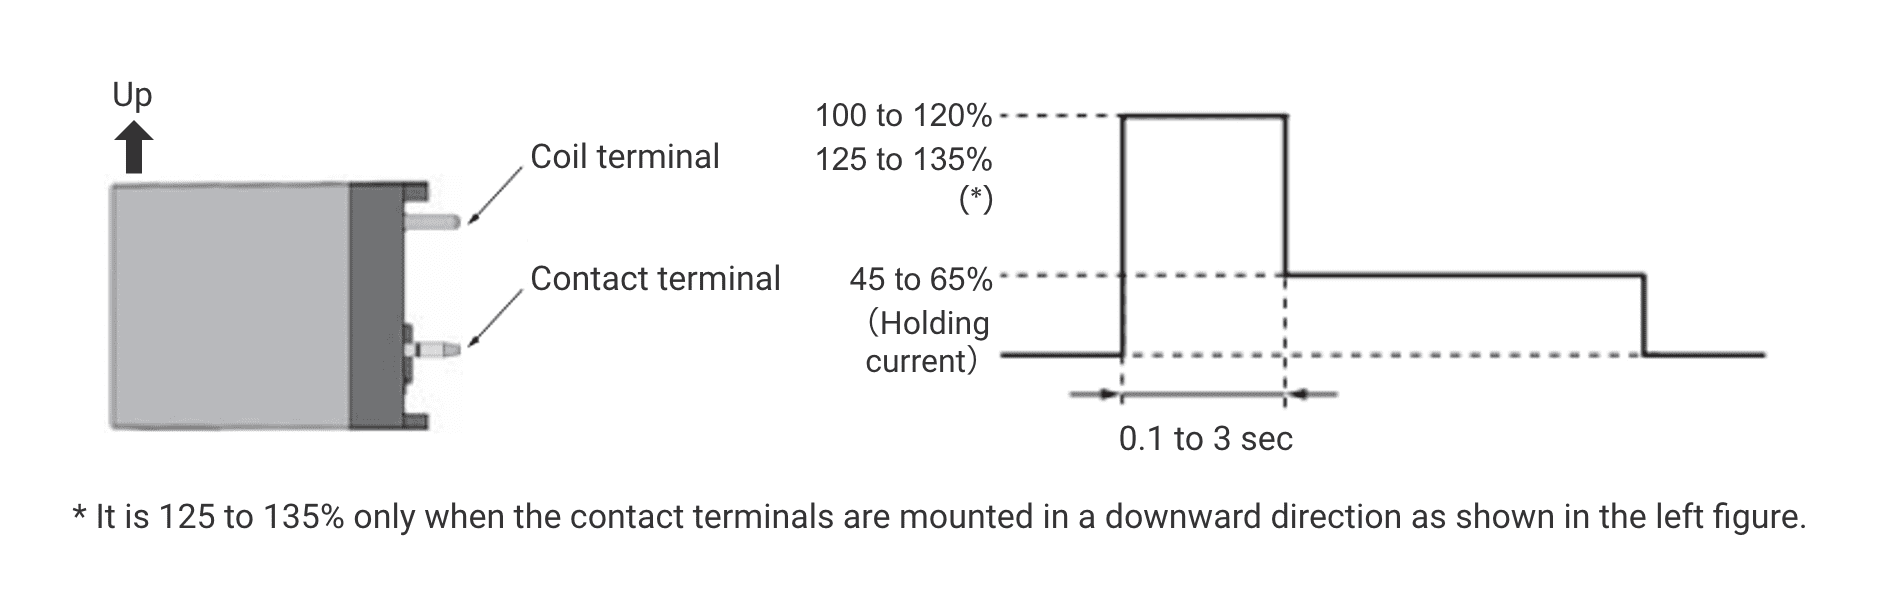 * It is 125 to 135% only when the contact terminals are mounted in a downward direction as shown in the left figure.